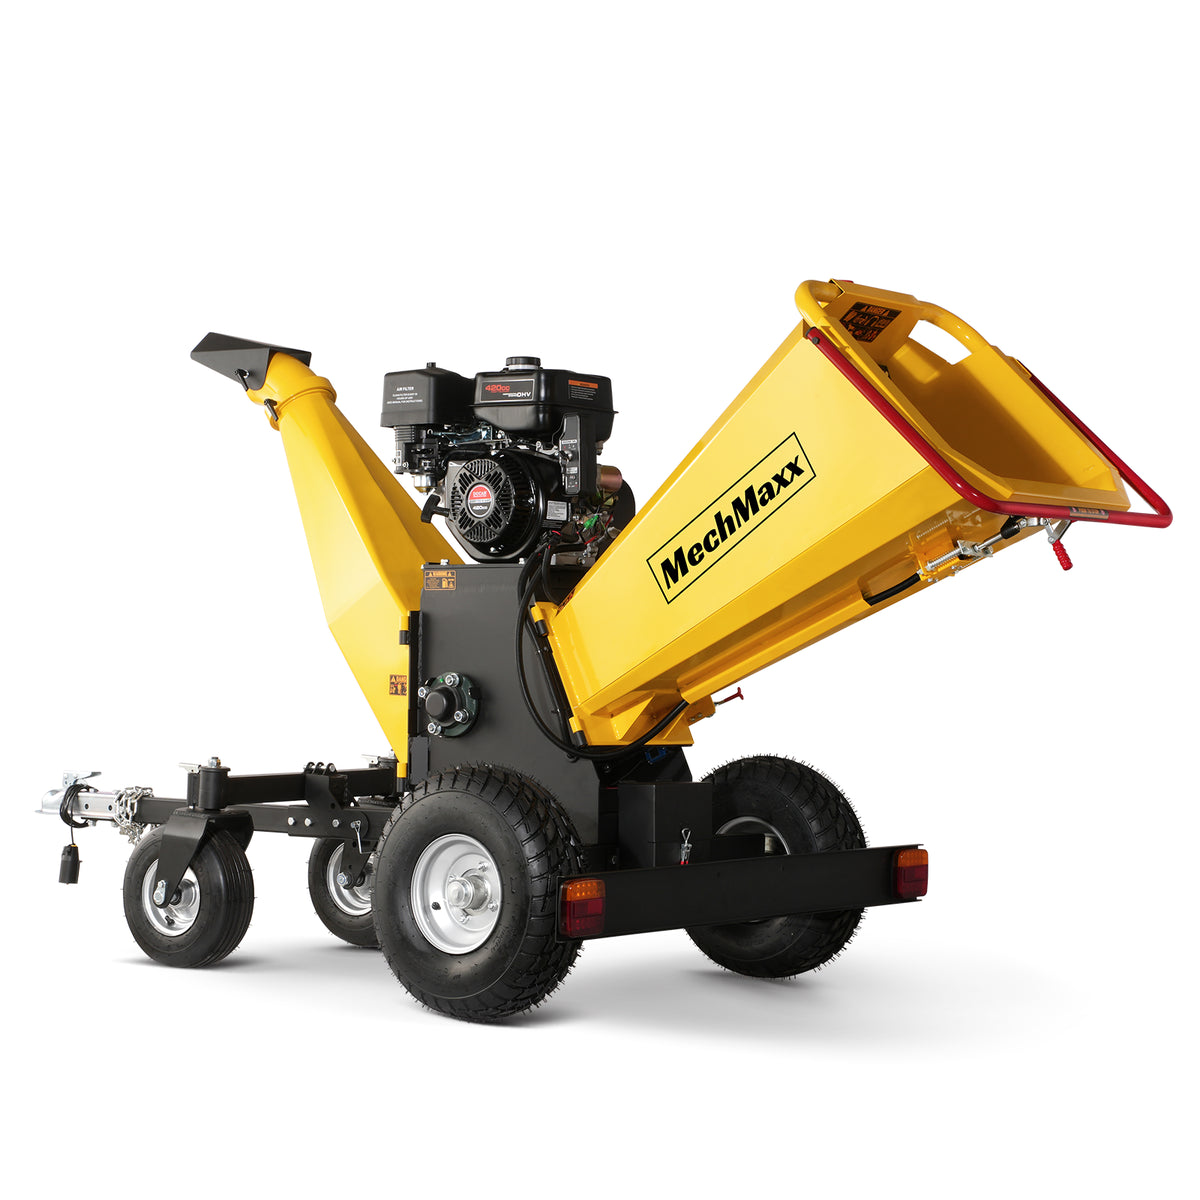 6 inch E-start Ducar 420cc 15hp Gas Powered 4 - Wheel Drum Wood chipper with Taillight